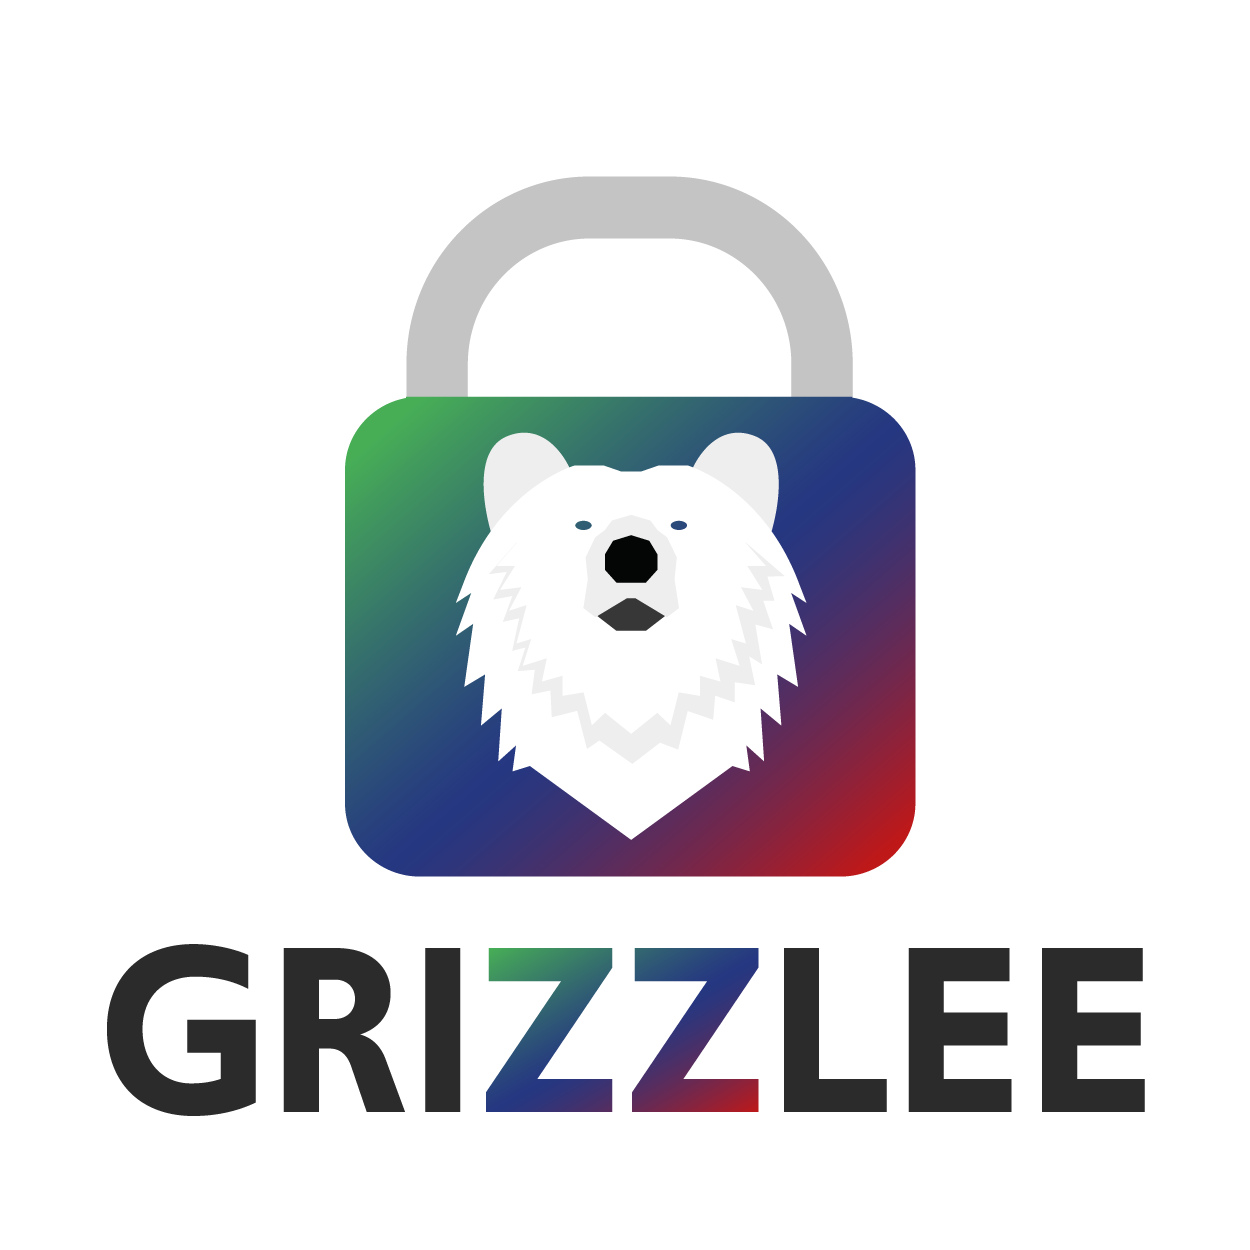 Grizzlee